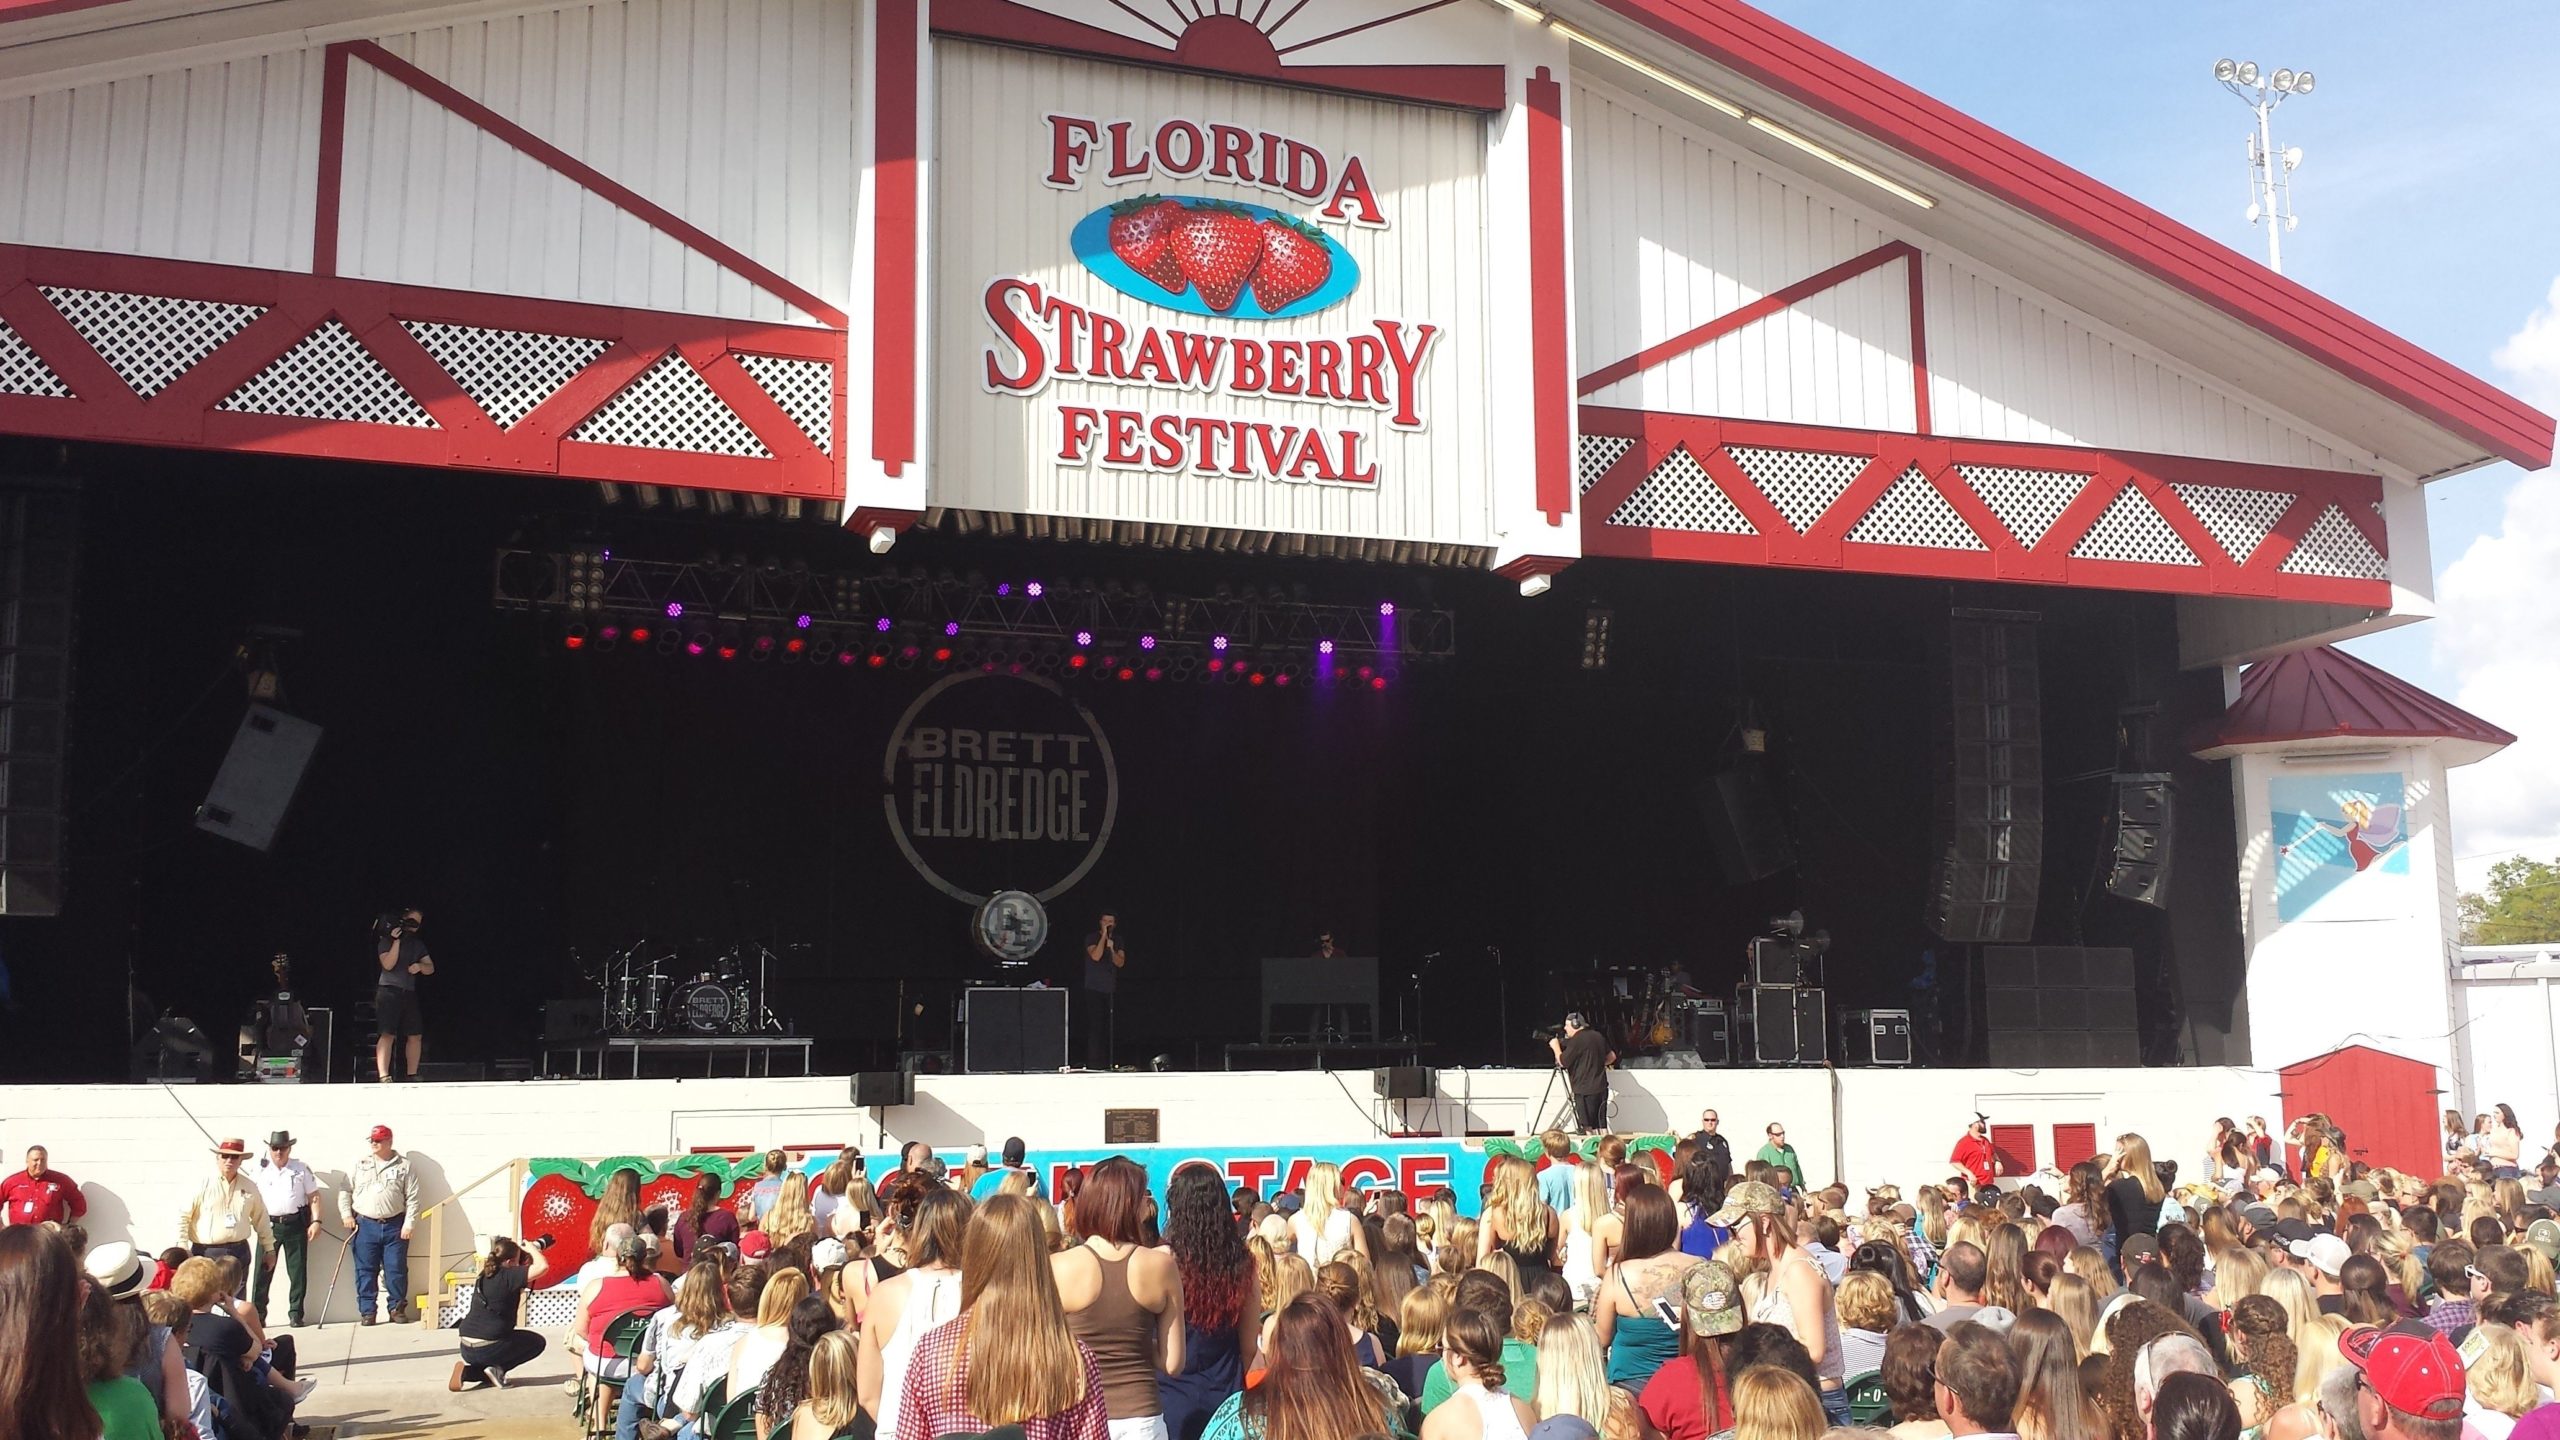 Big Name Acts Are Back for 2022 at the Florida Strawberry Festival